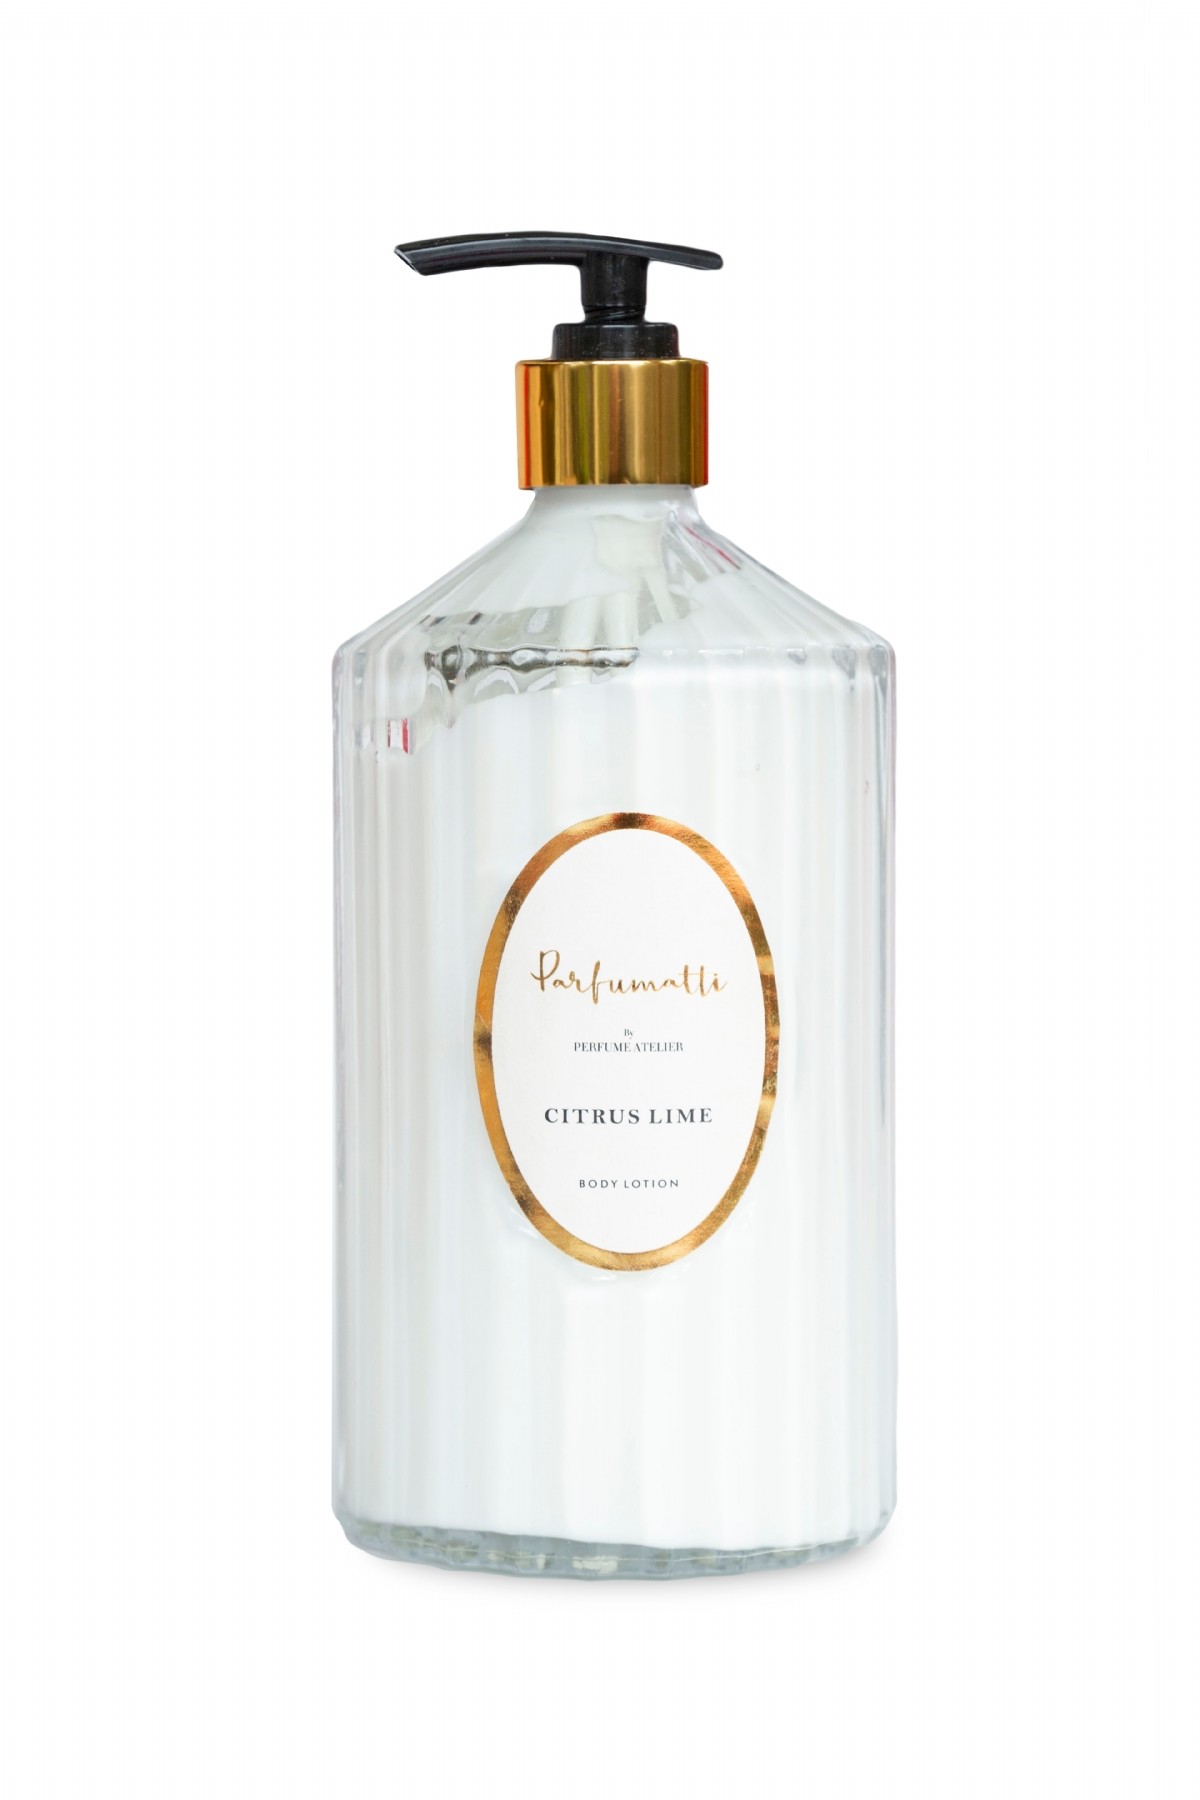 600 Ml Glass Bottle of Citrus Lime Hand & Body Lotion image